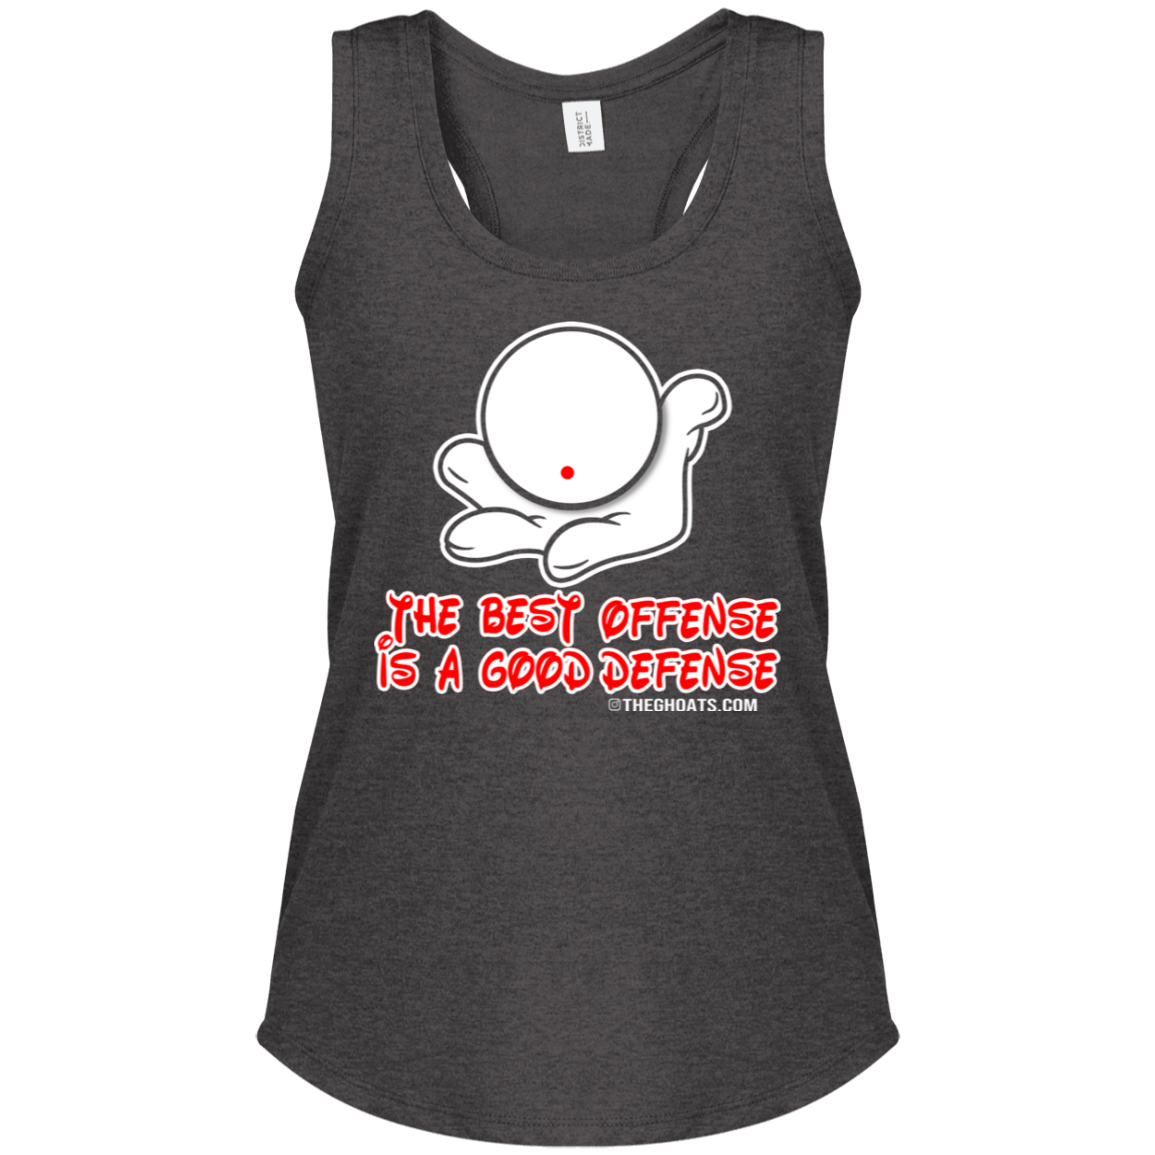 The GHOATS Custom Design. #5 The Best Offense is a Good Defense. Ladies' Perfect Tri Racerback Tank